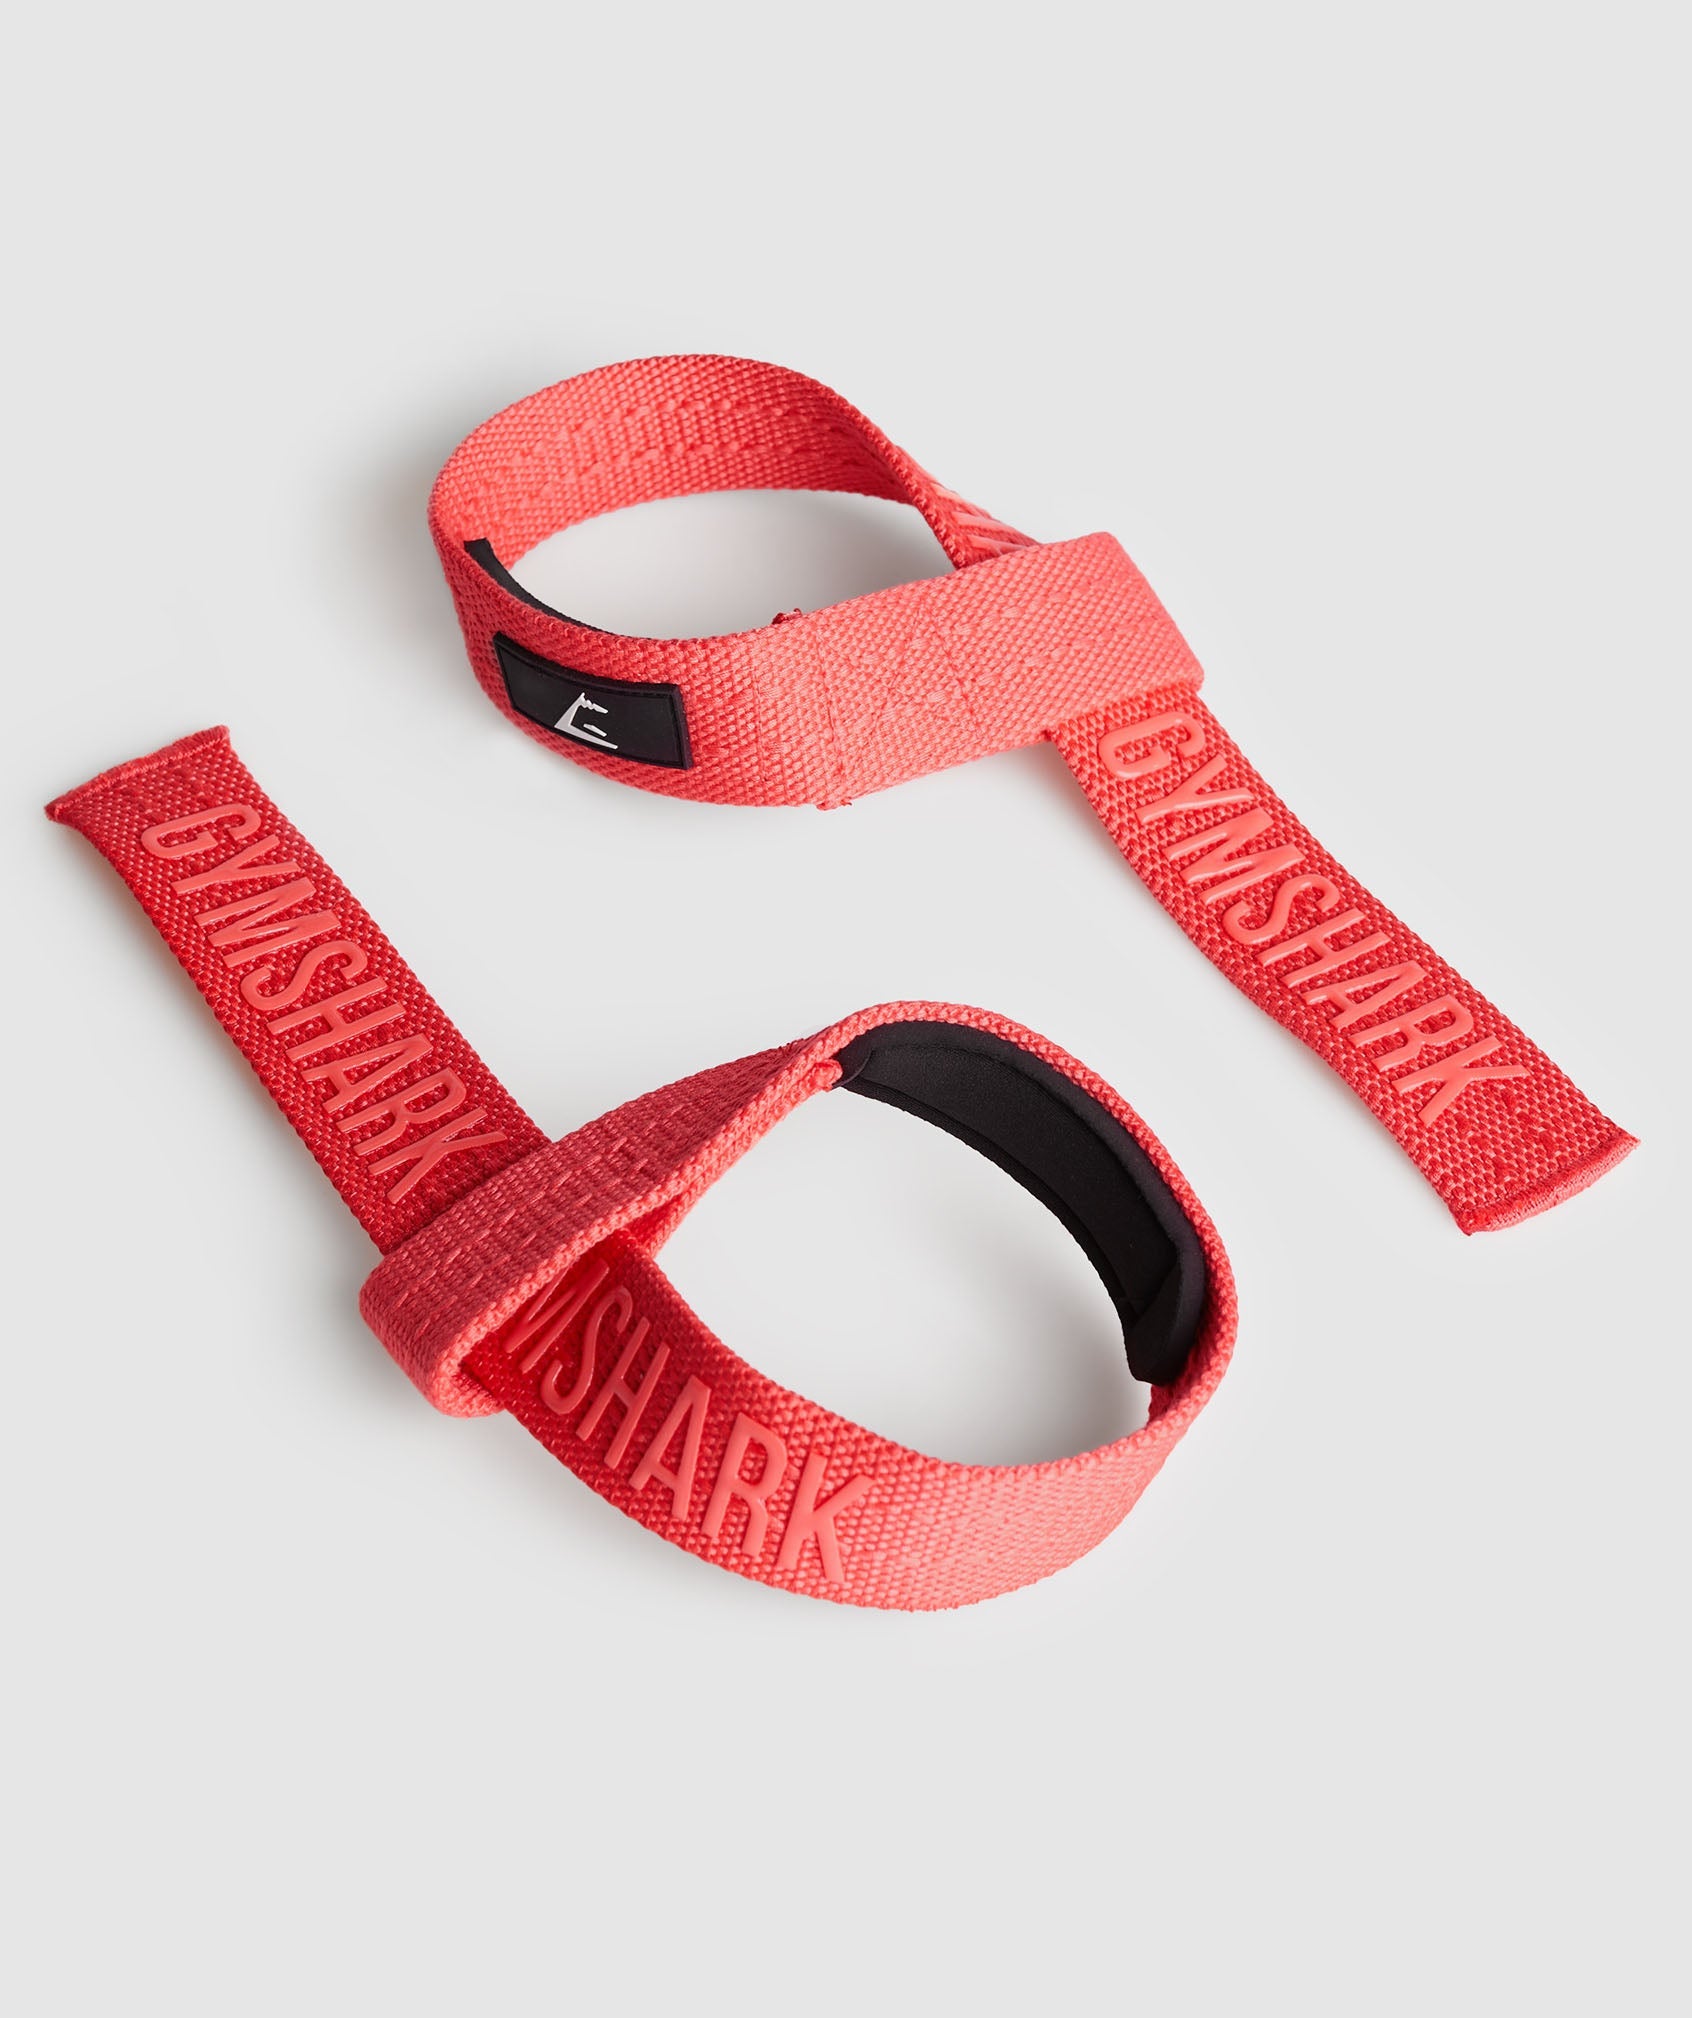 Buy Lifting Straps Silicone Grip